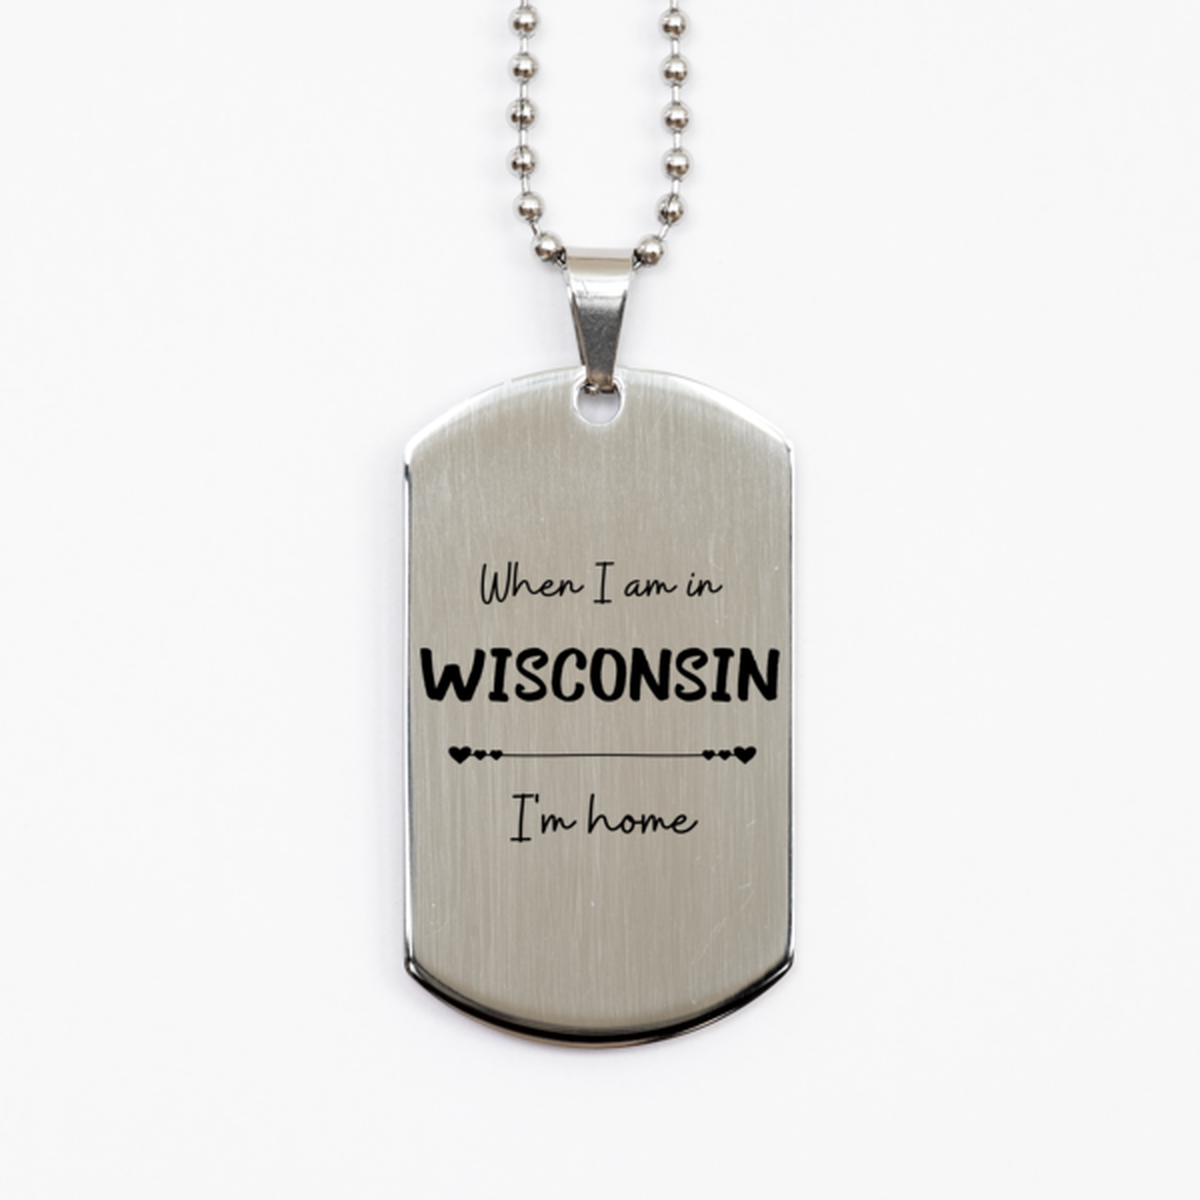 When I am in Wisconsin I'm home Silver Dog Tag, Cheap Gifts For Wisconsin, State Wisconsin Birthday Gifts for Friends Coworker